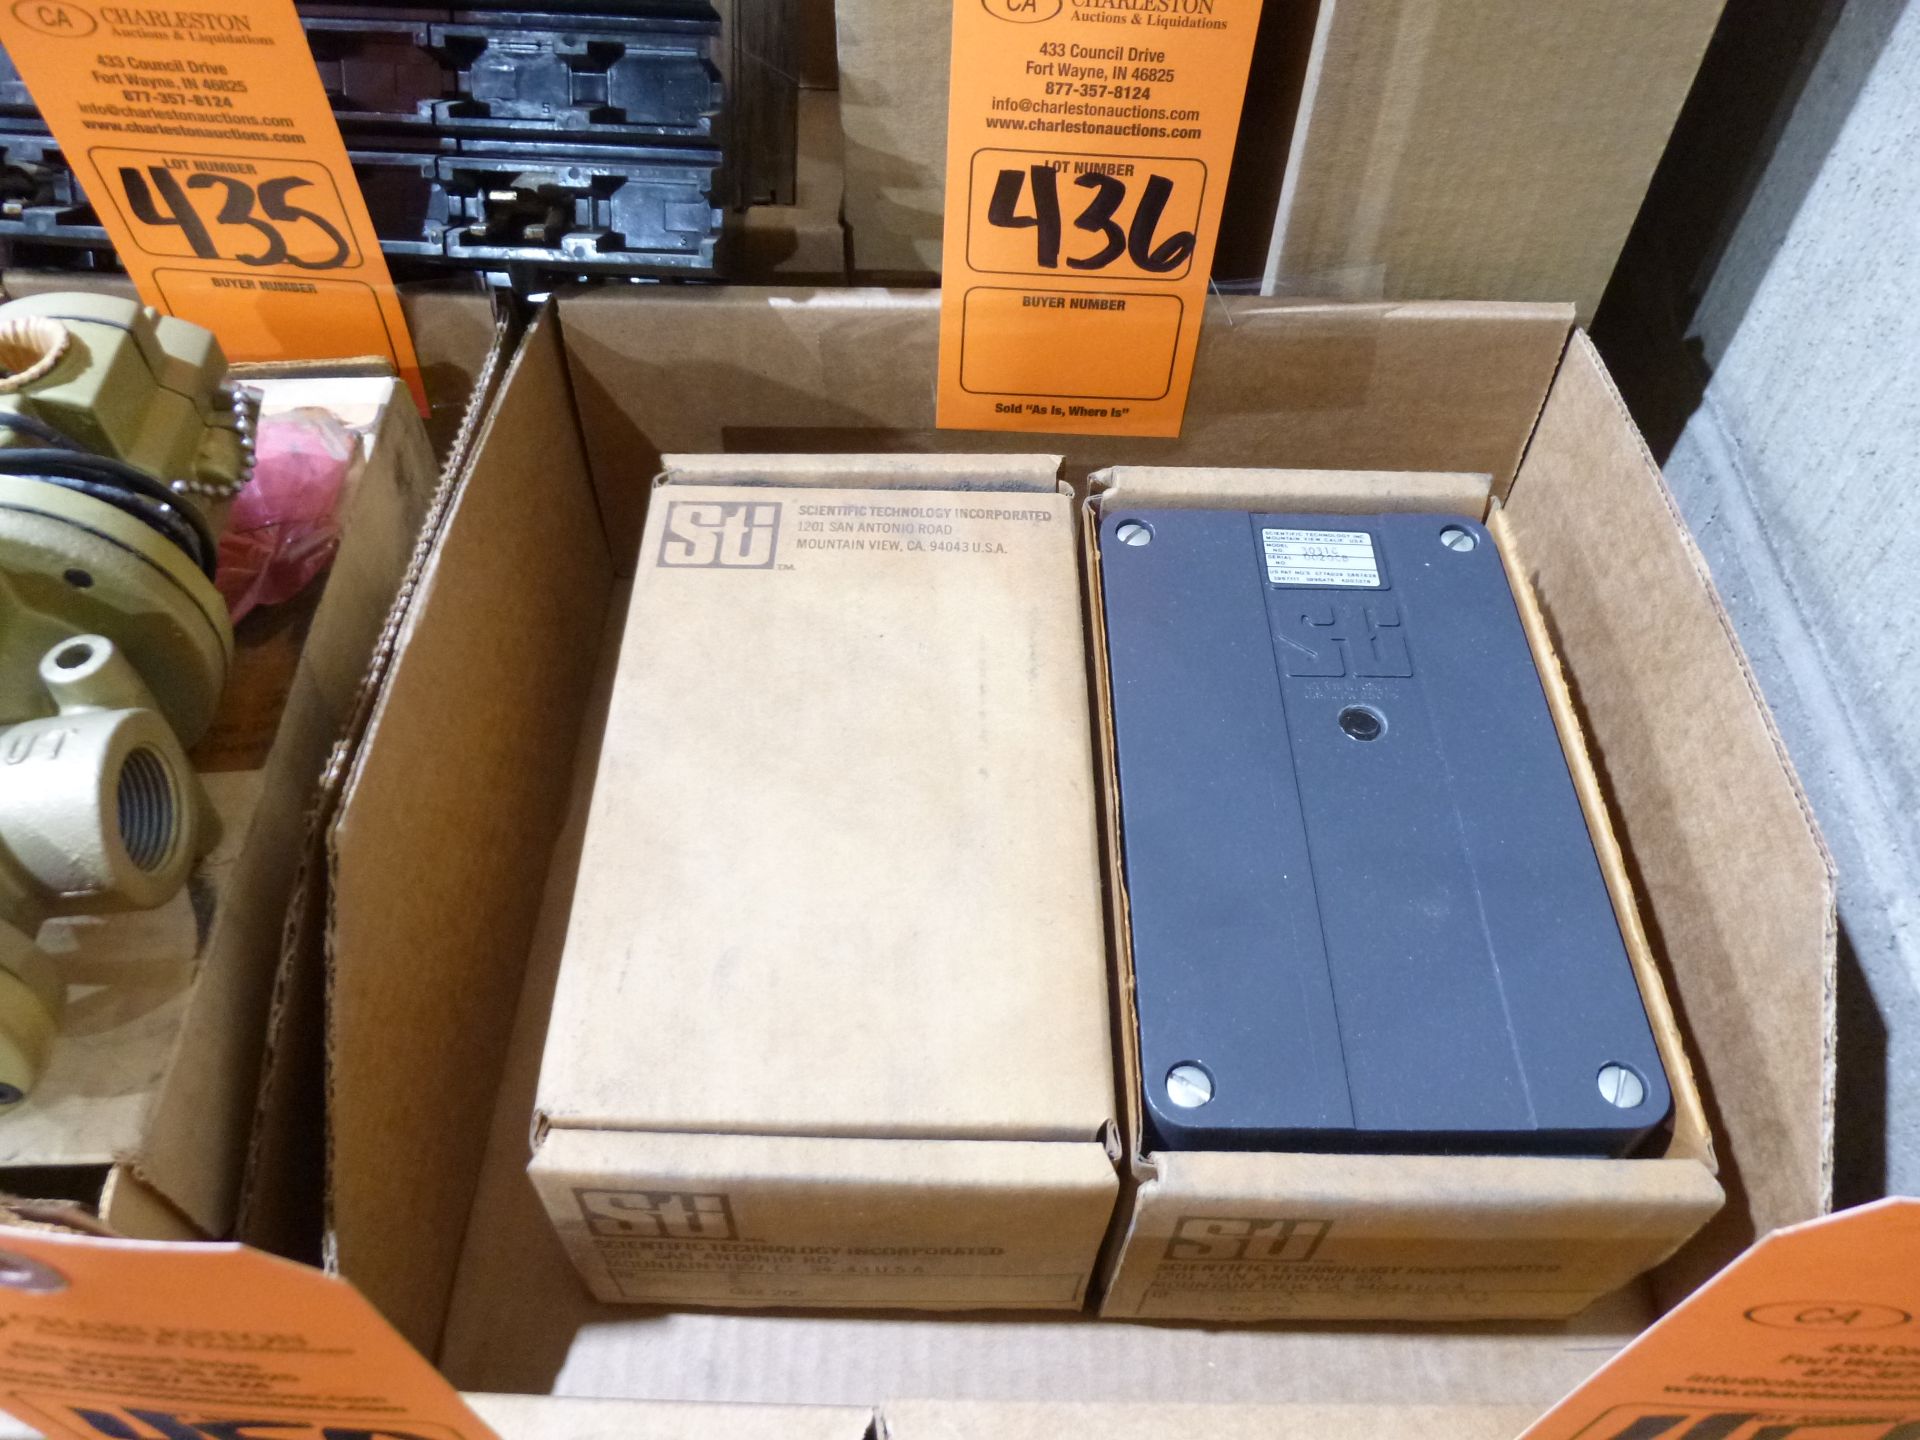 Qty 2 STI model 3031C, new in boxes, as always with Brolyn LLC auctions, all lots can be picked up